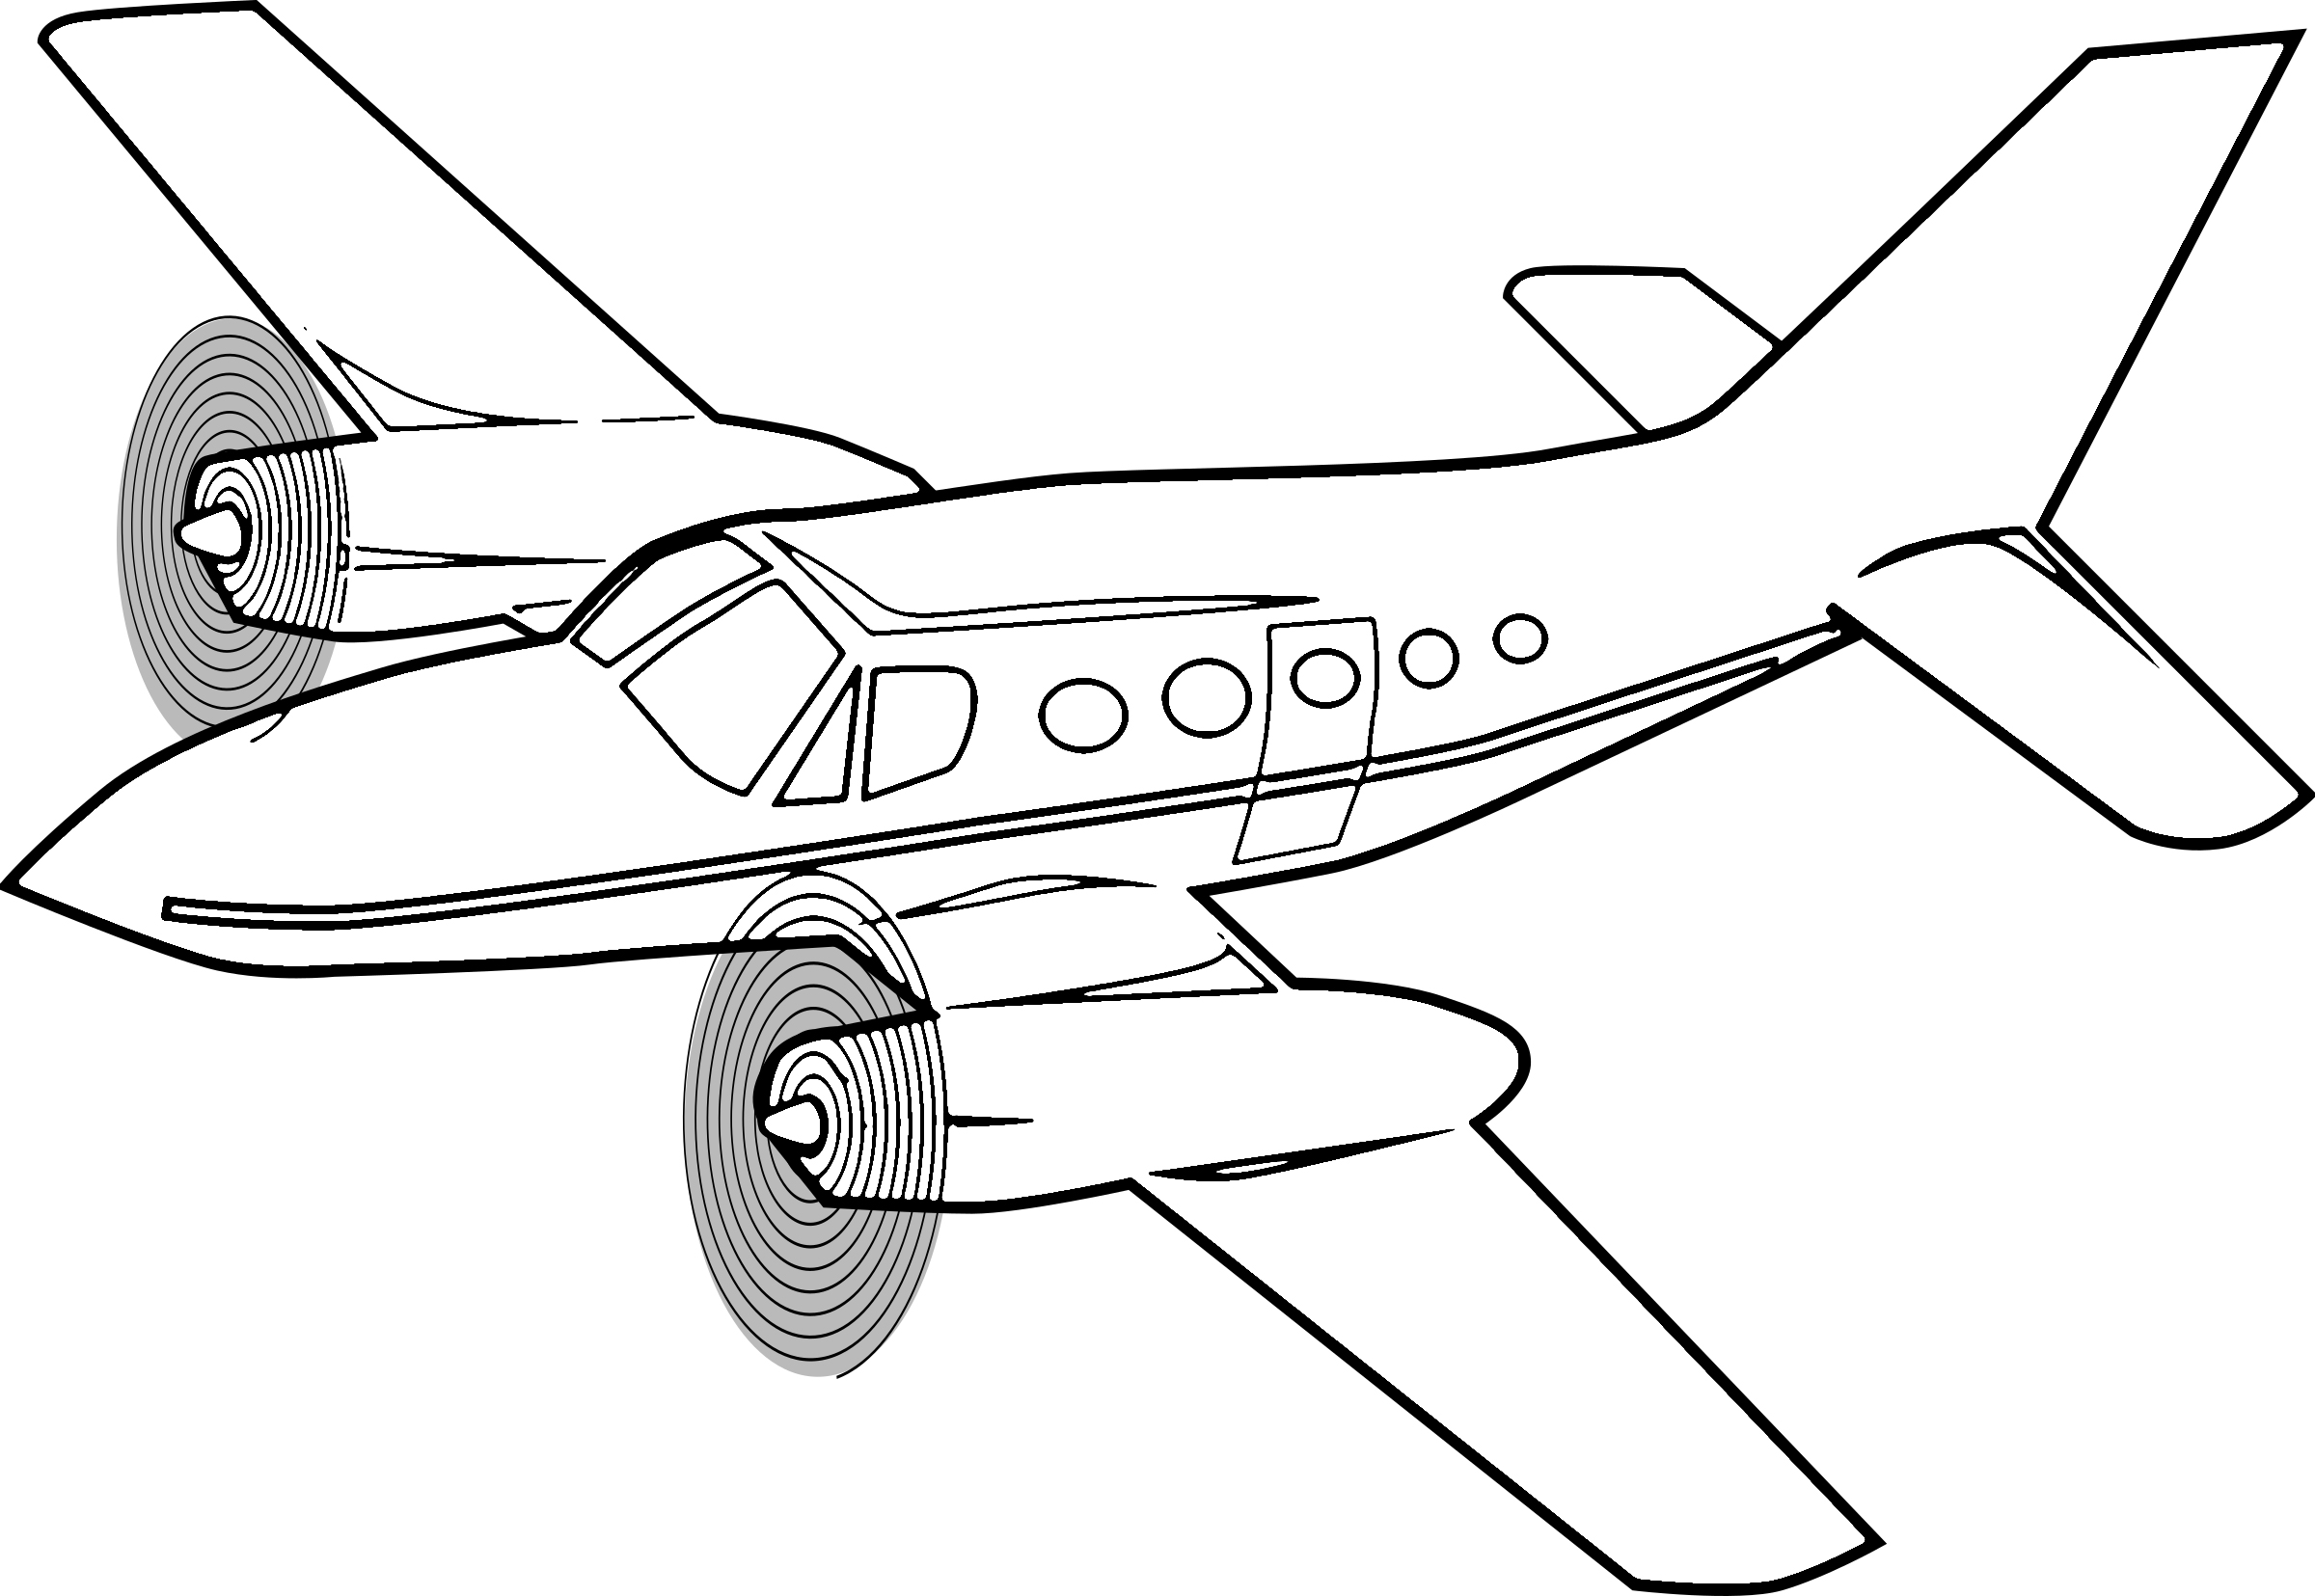 20 Free Airplane Coloring Pages for Kids     BestAppsForKids.com